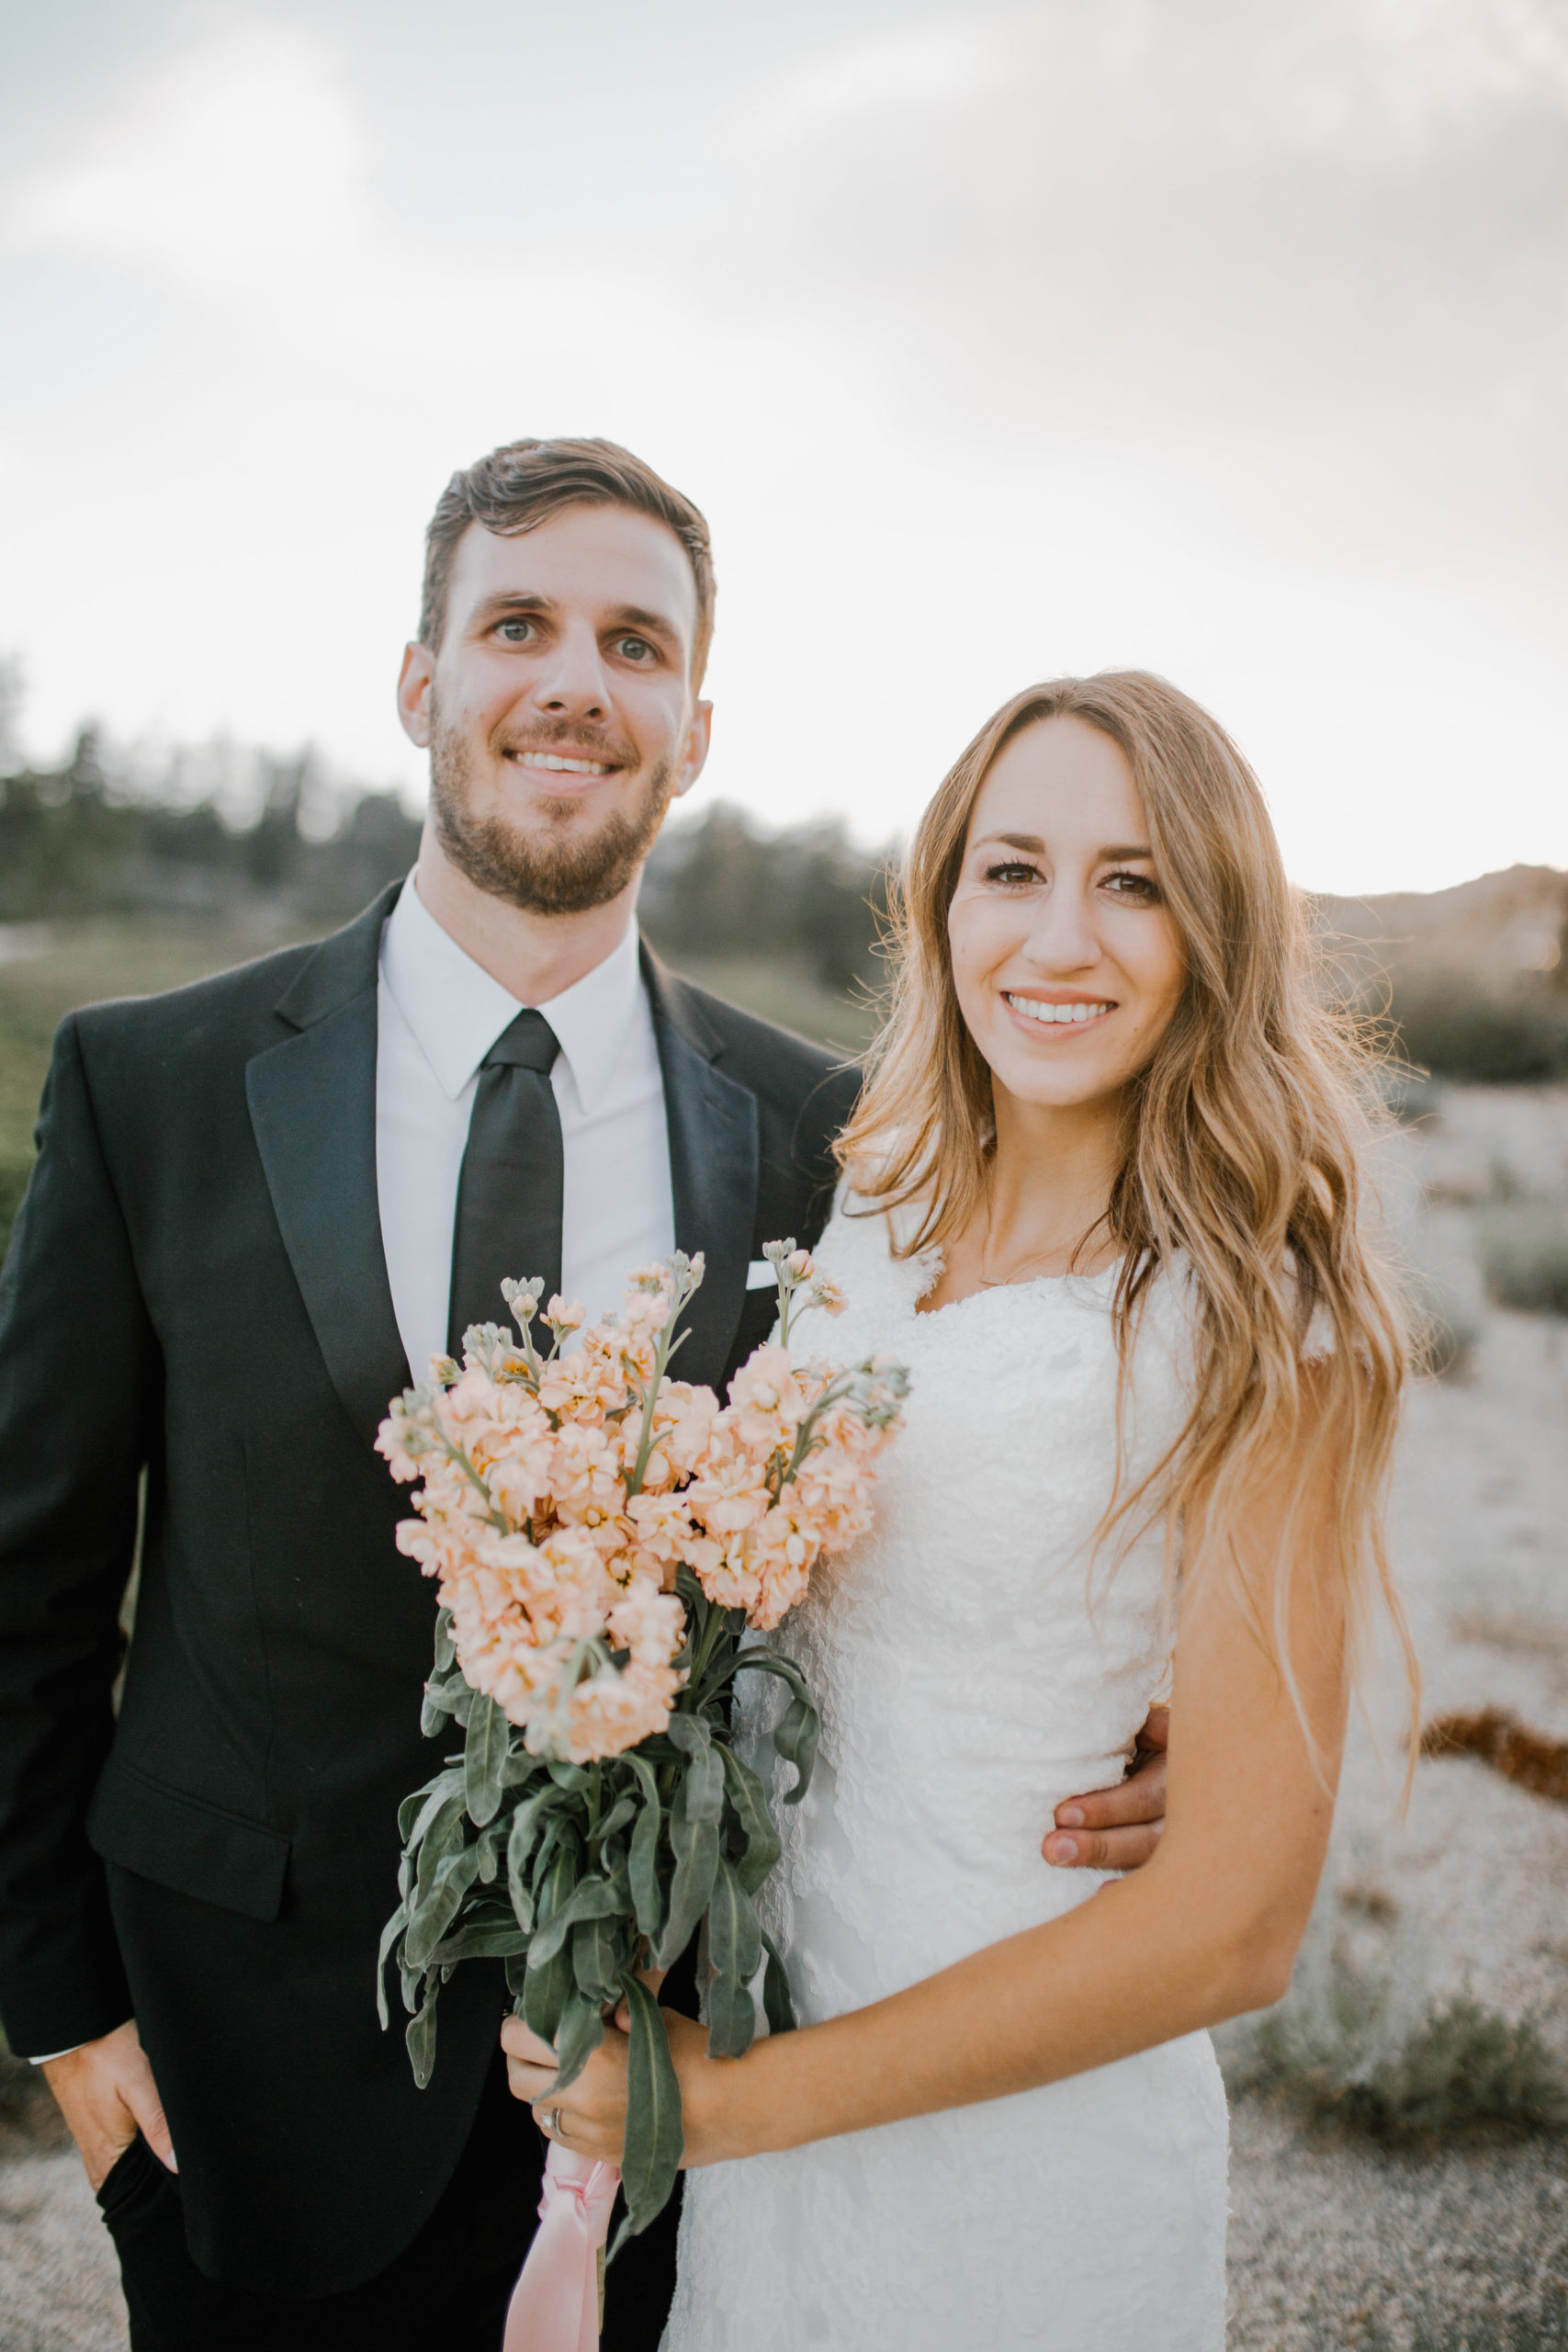 Sacramento wedding photographer captures a bride and groom standing in the mountains